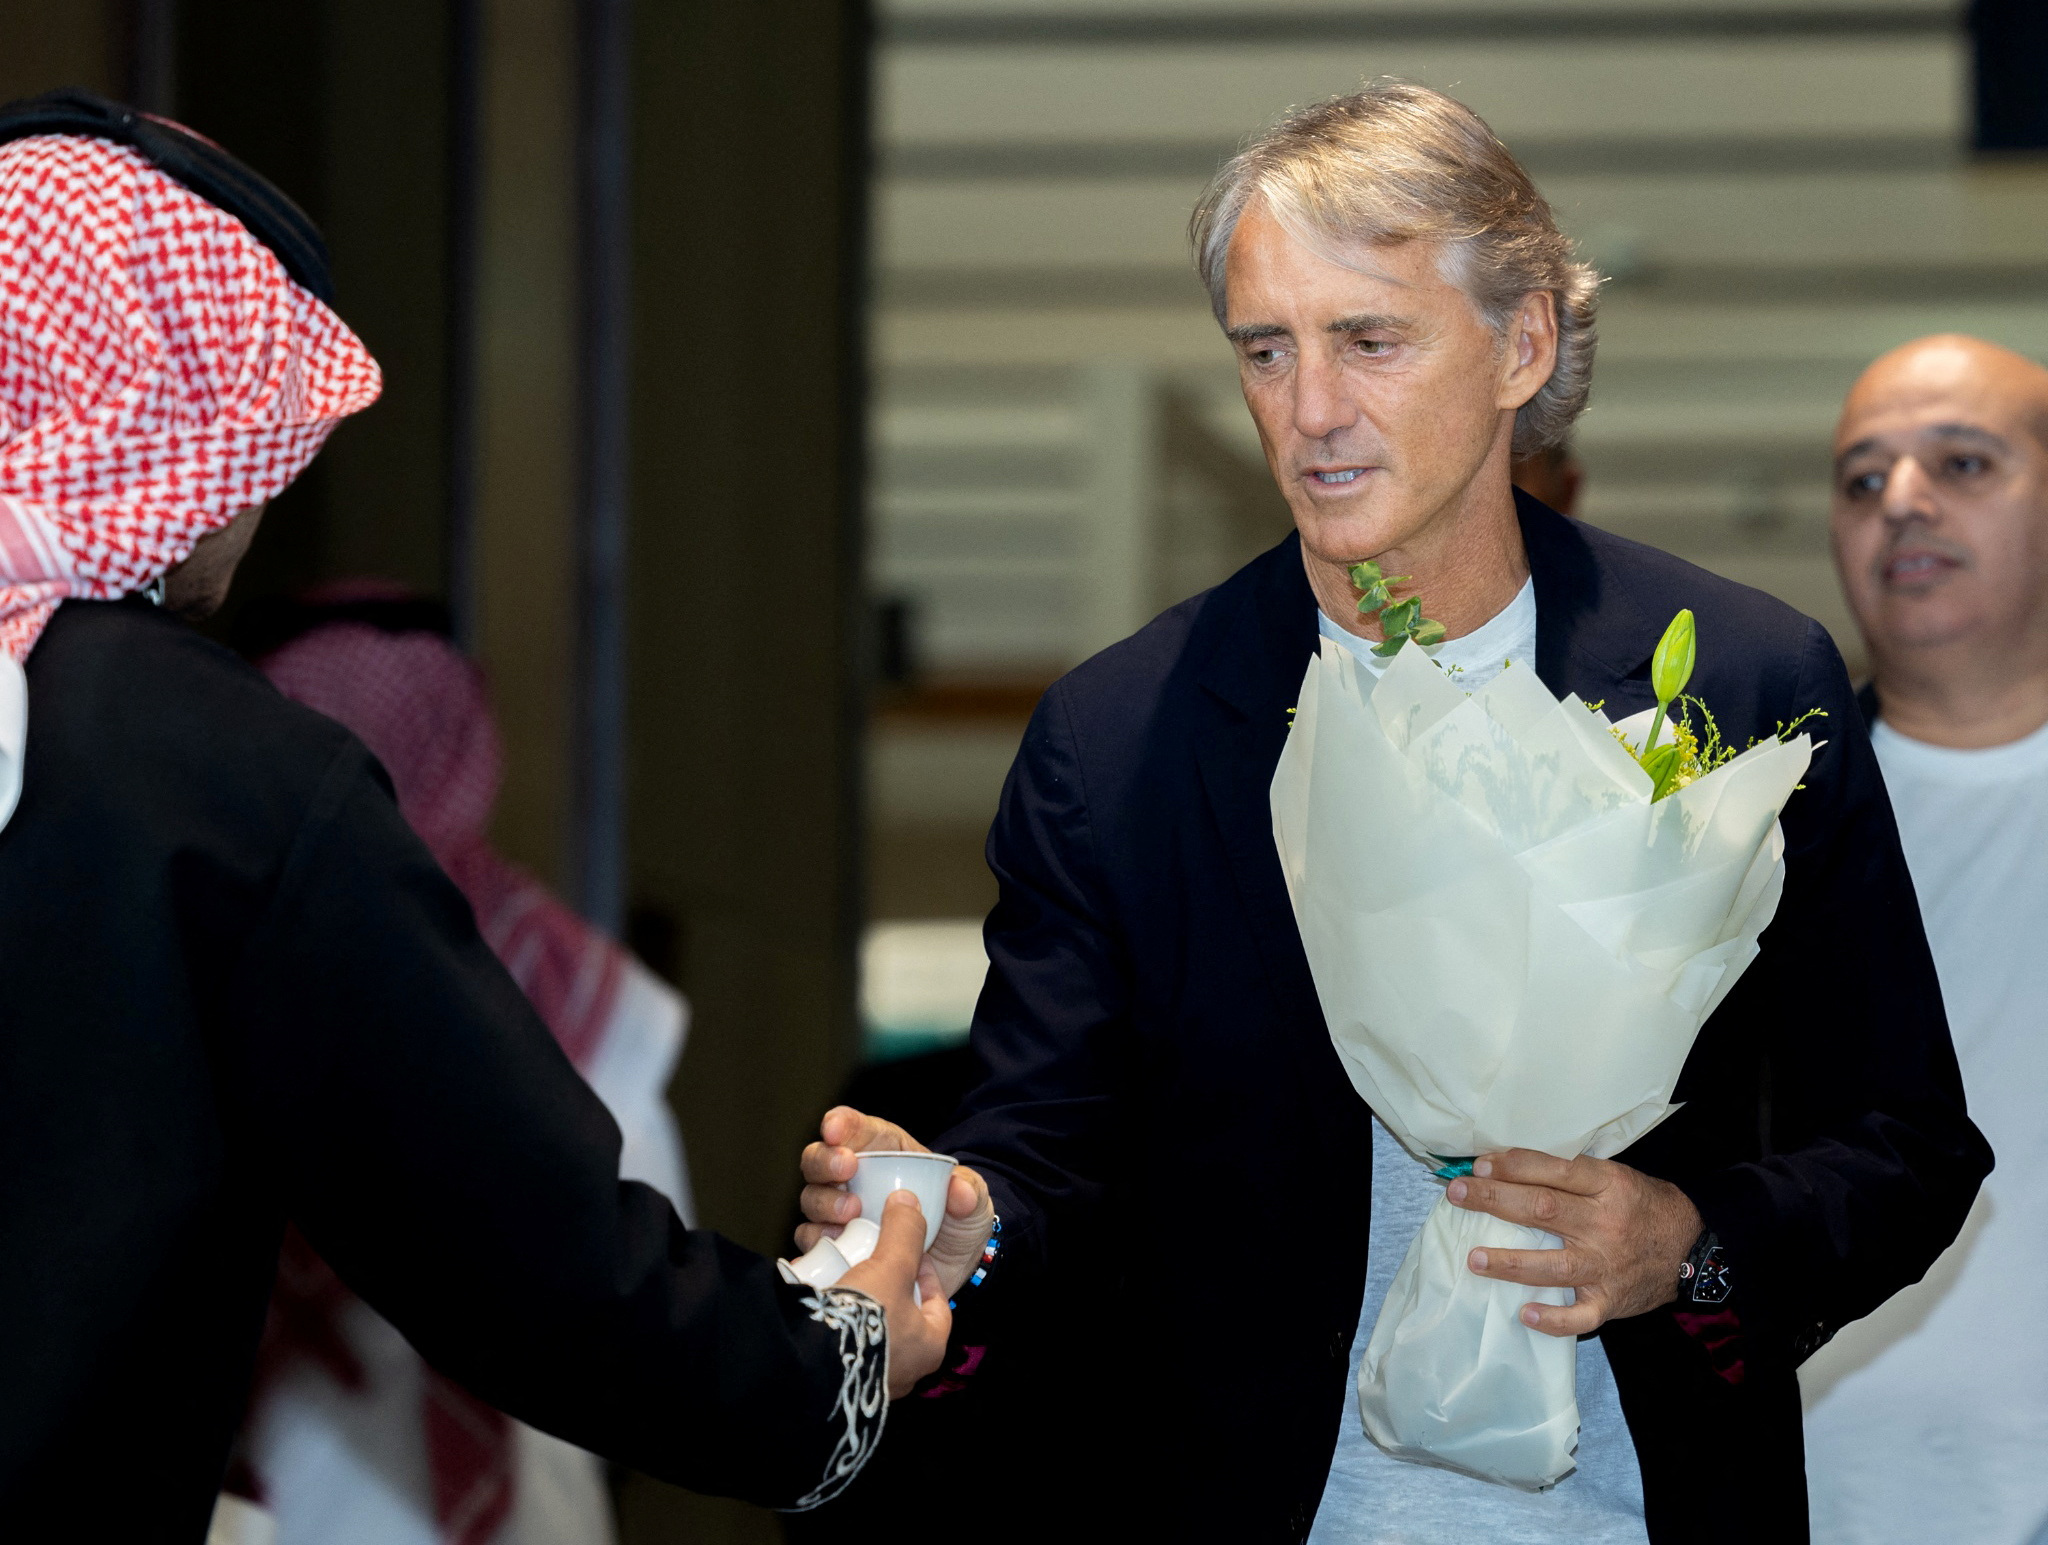 New Saudi national team coach Mancini aims for Asian Cup redemption